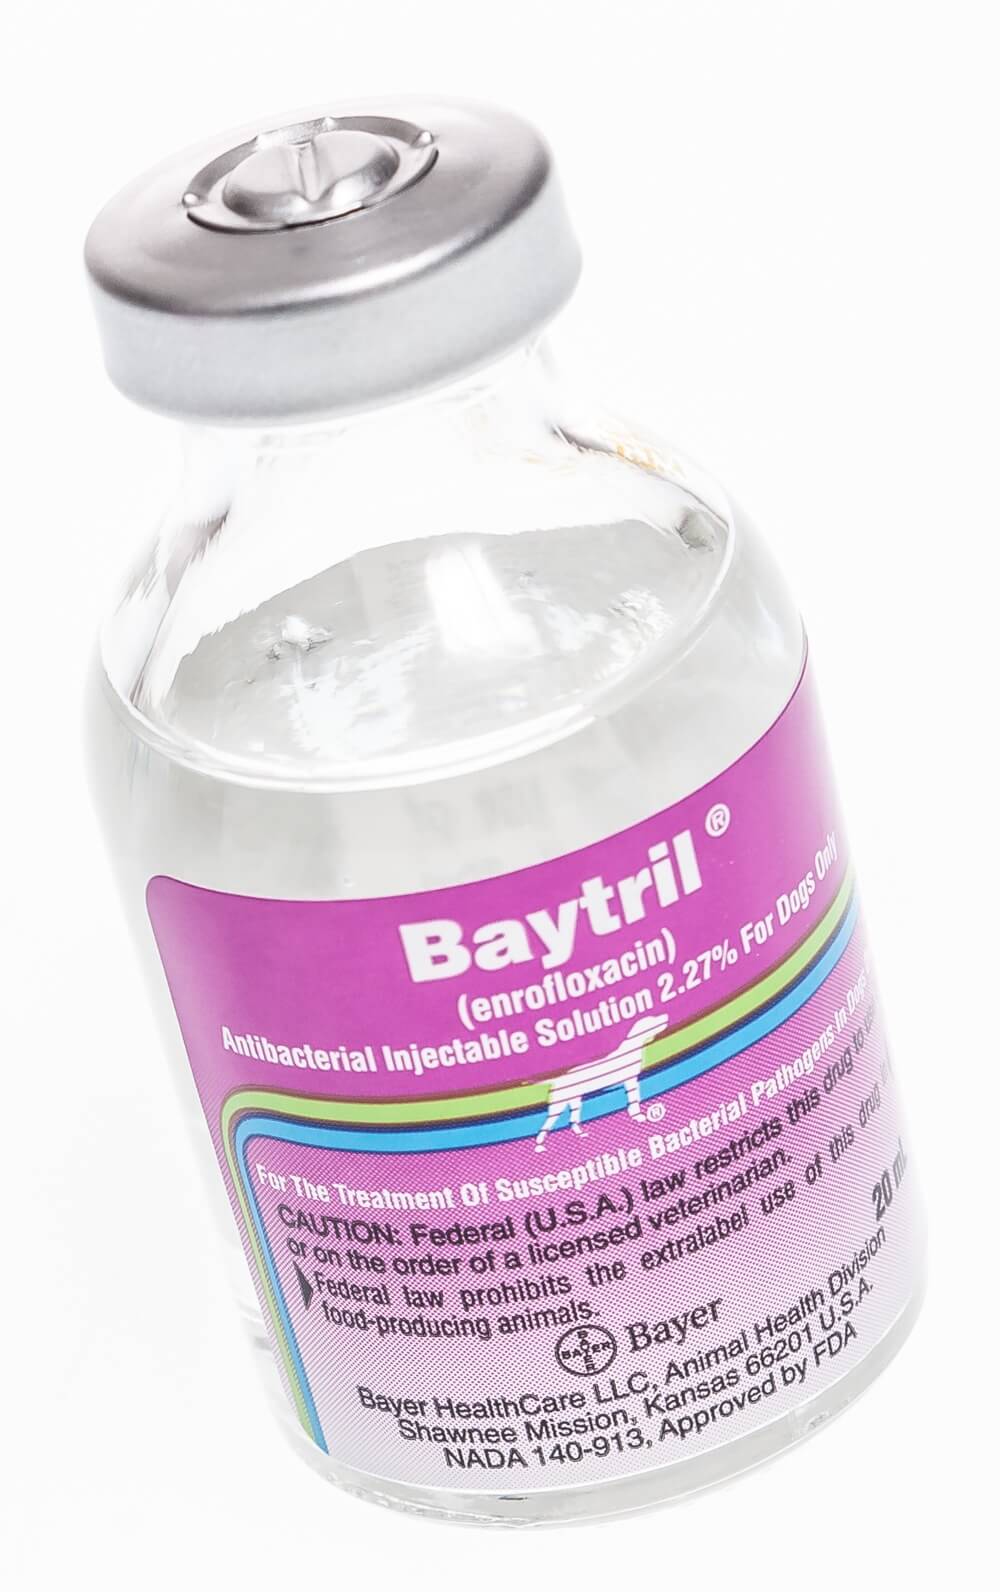 baytril side effects for dogs